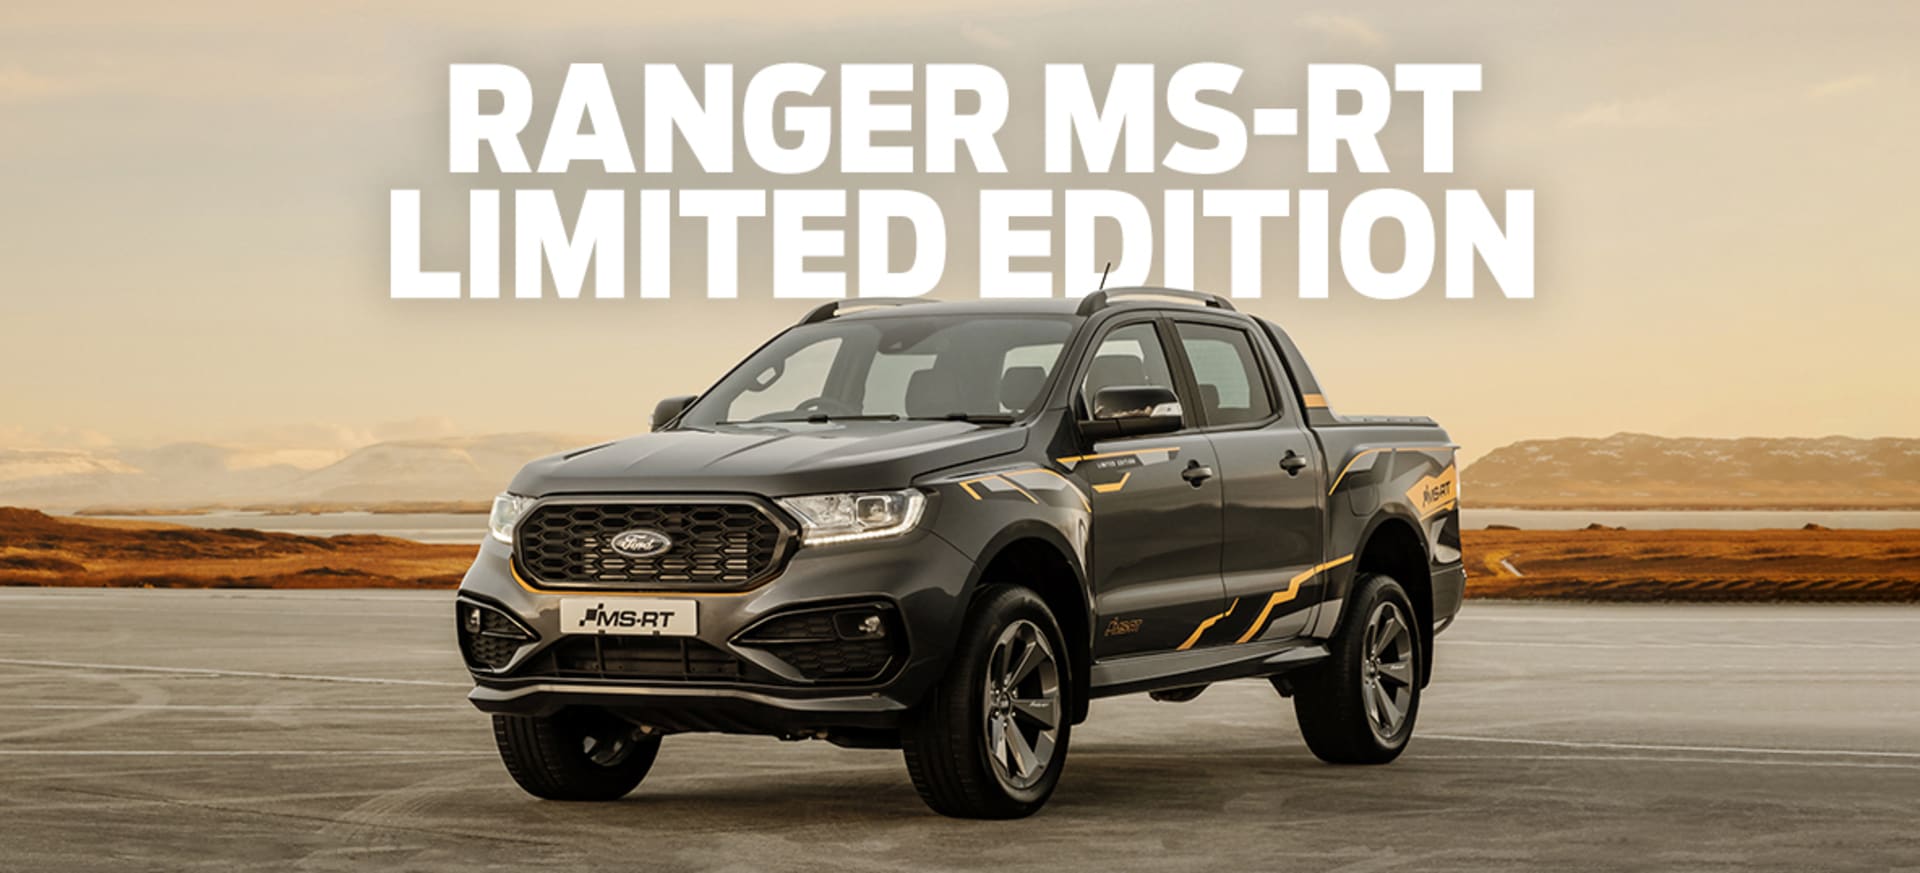 FORD RANGER MS-RT LIMITED EDITION